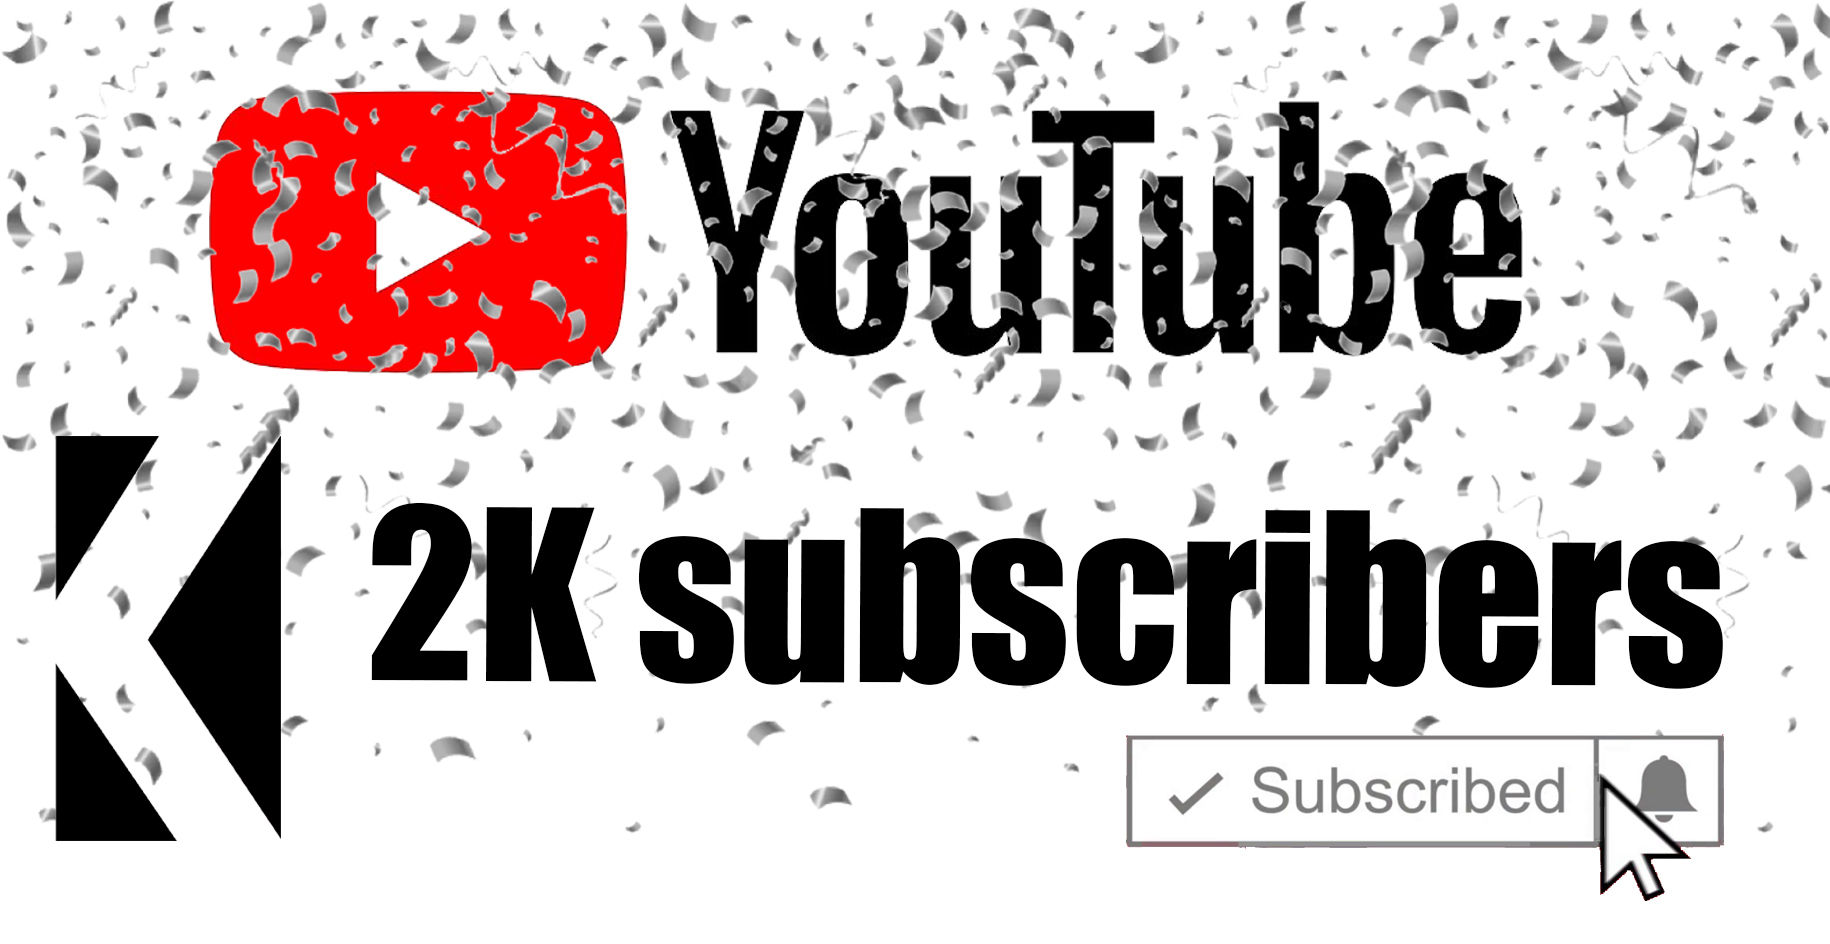 Youtube thank. Thanks 2000 subscribers.